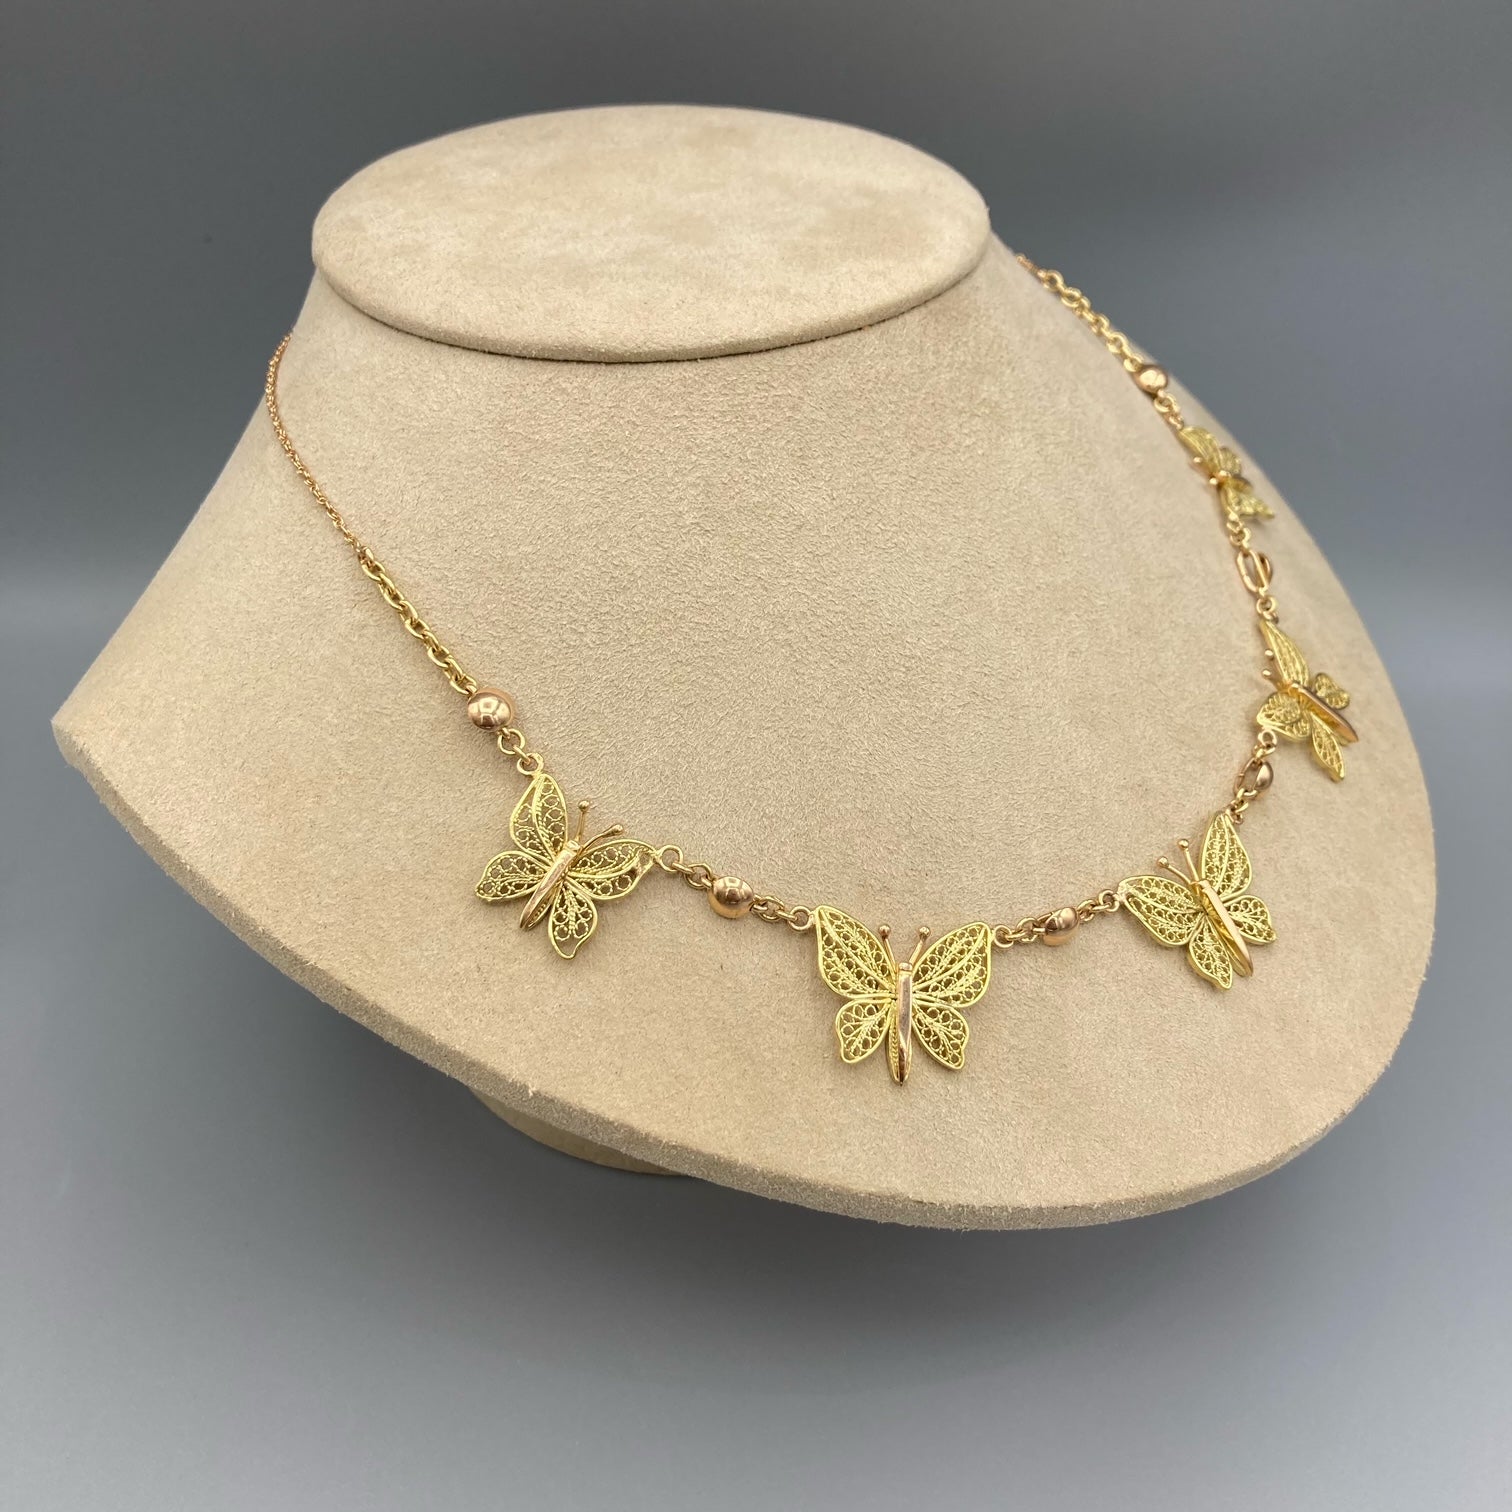 French Vintage Necklace with Filigree Butterfly Motifs in 18k Rose Gold and Yellow Gold